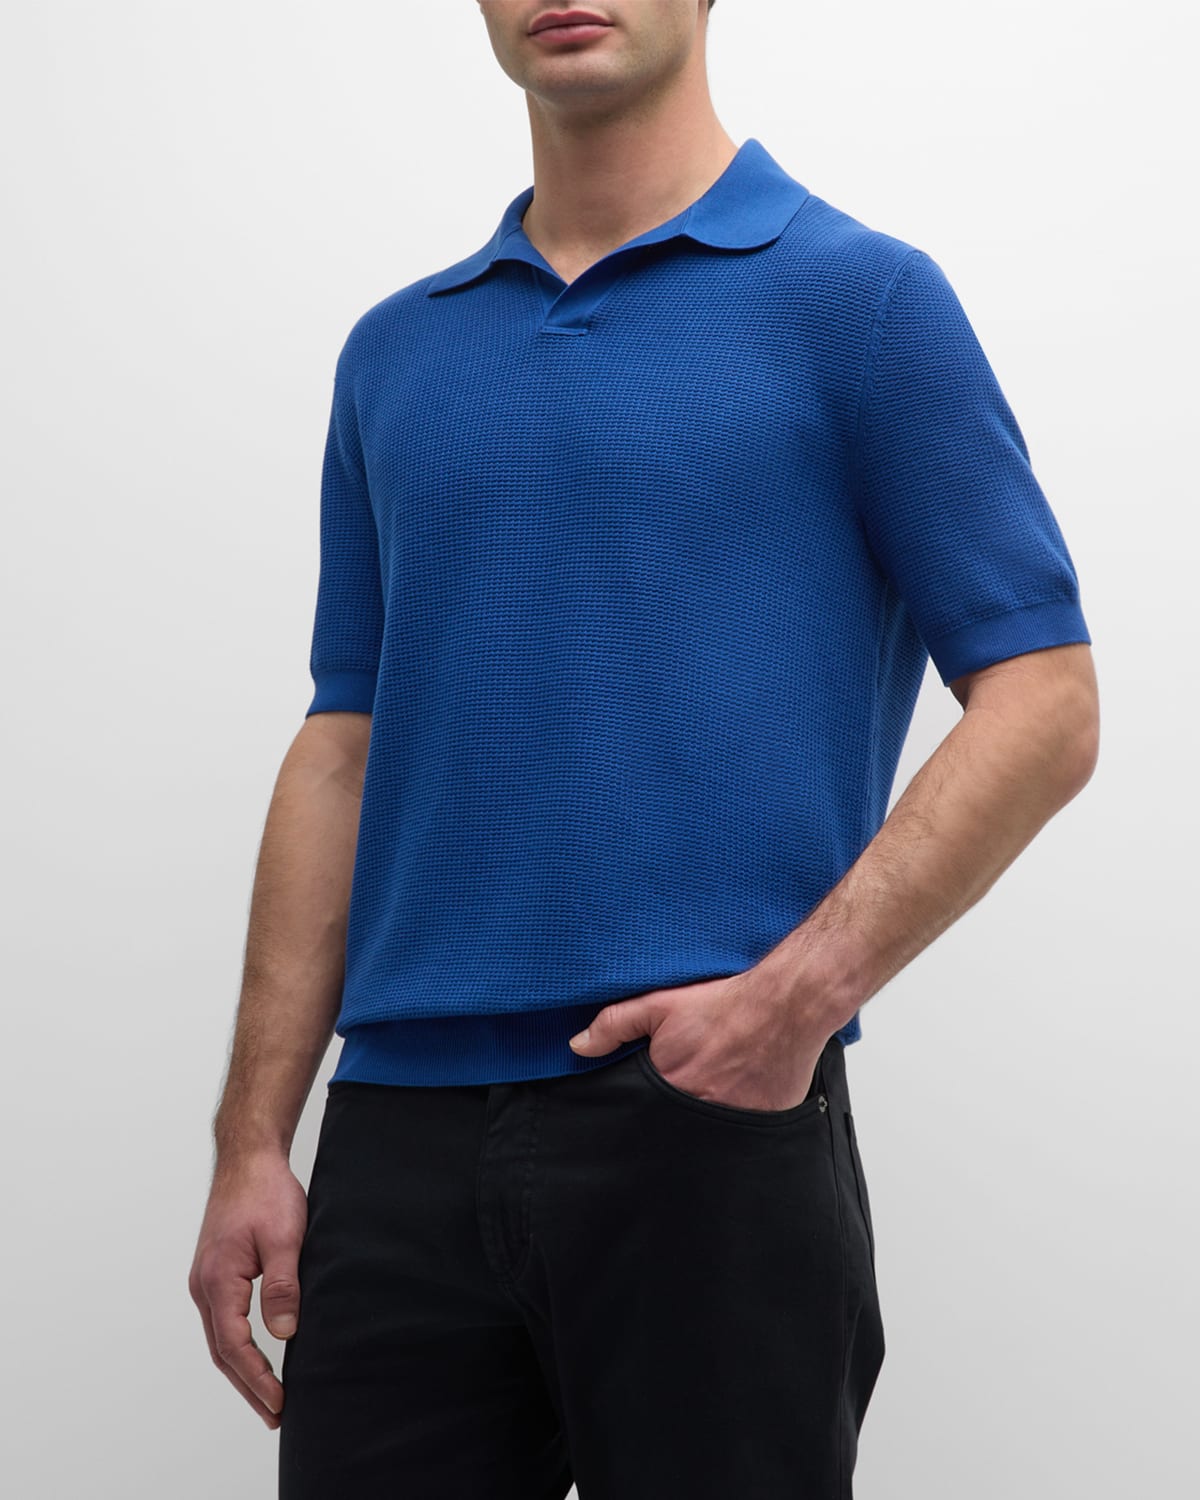 Zegna Men's Cotton Knit Short-sleeve Polo Sweater In Bright Blue Solid